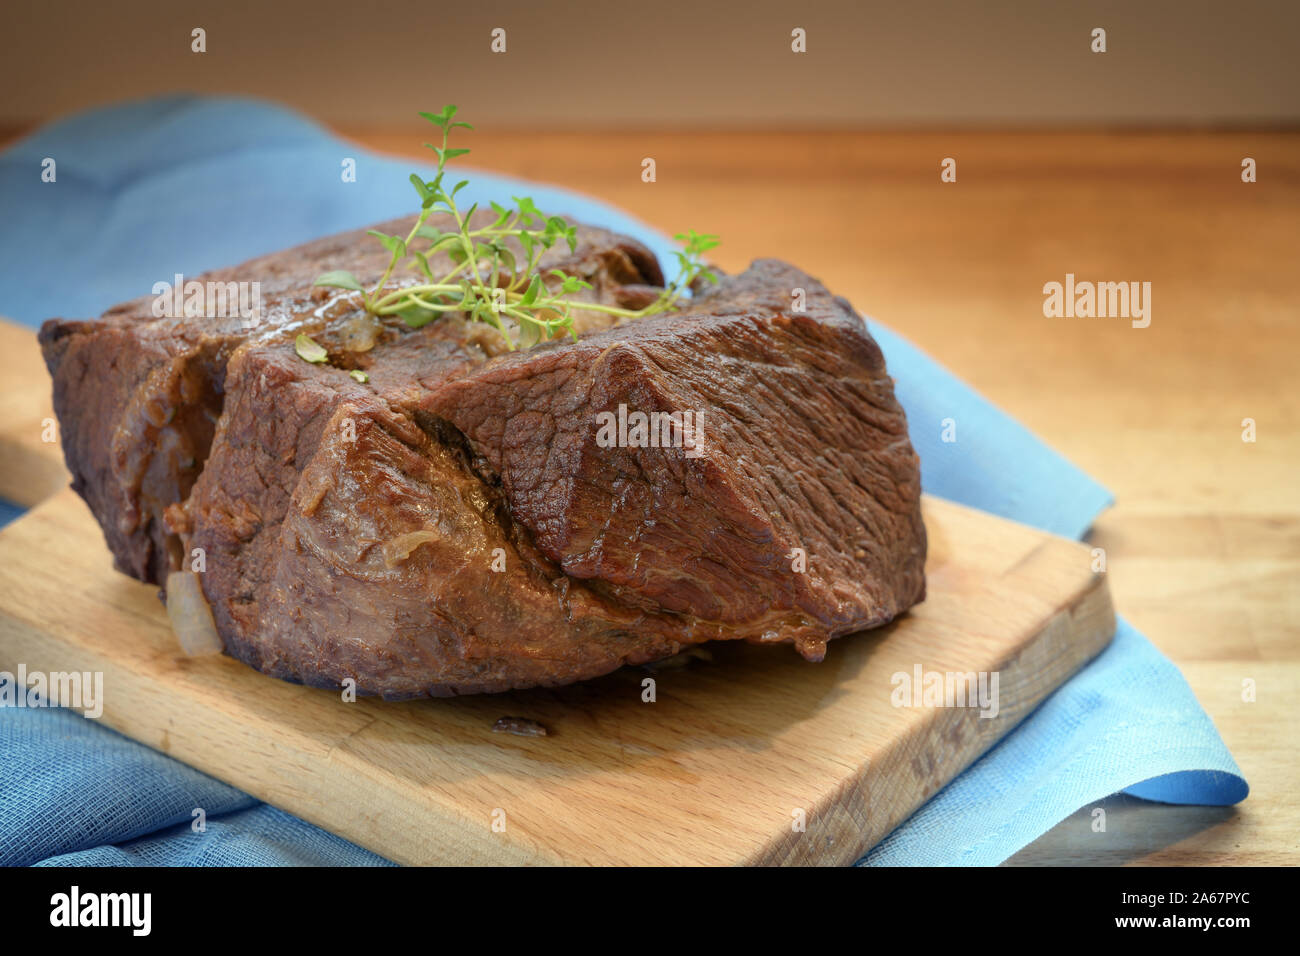 Braised roast beef with thyme garnish on a wooden board and a blue napkin for a festive dinner like boeuf bourguignon, copy space, selected focus, nar Stock Photo